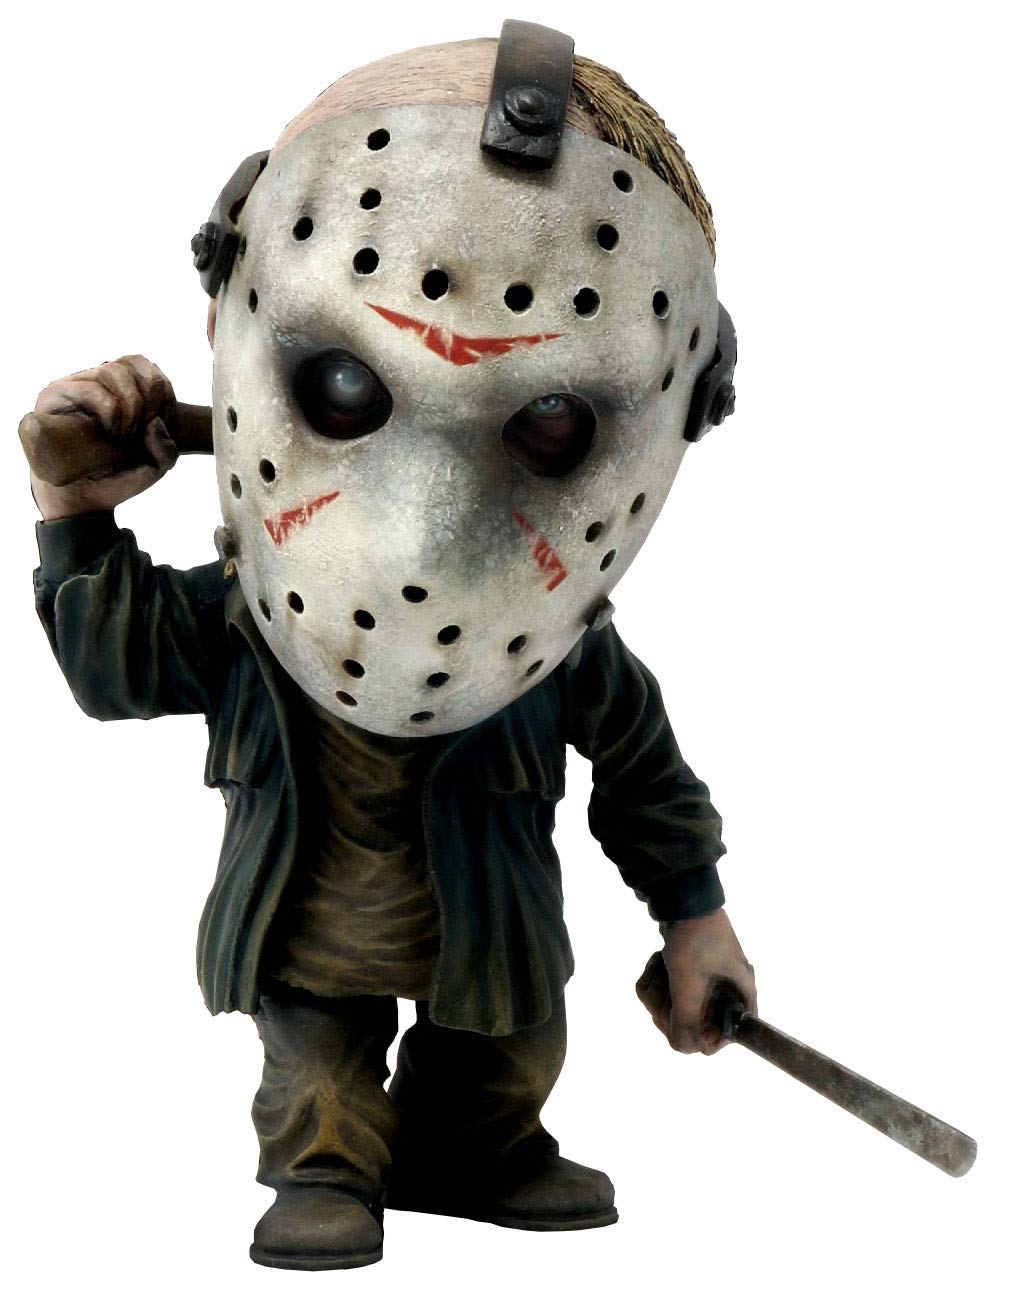 DefoReal Friday the 13th: Jason Voorhees